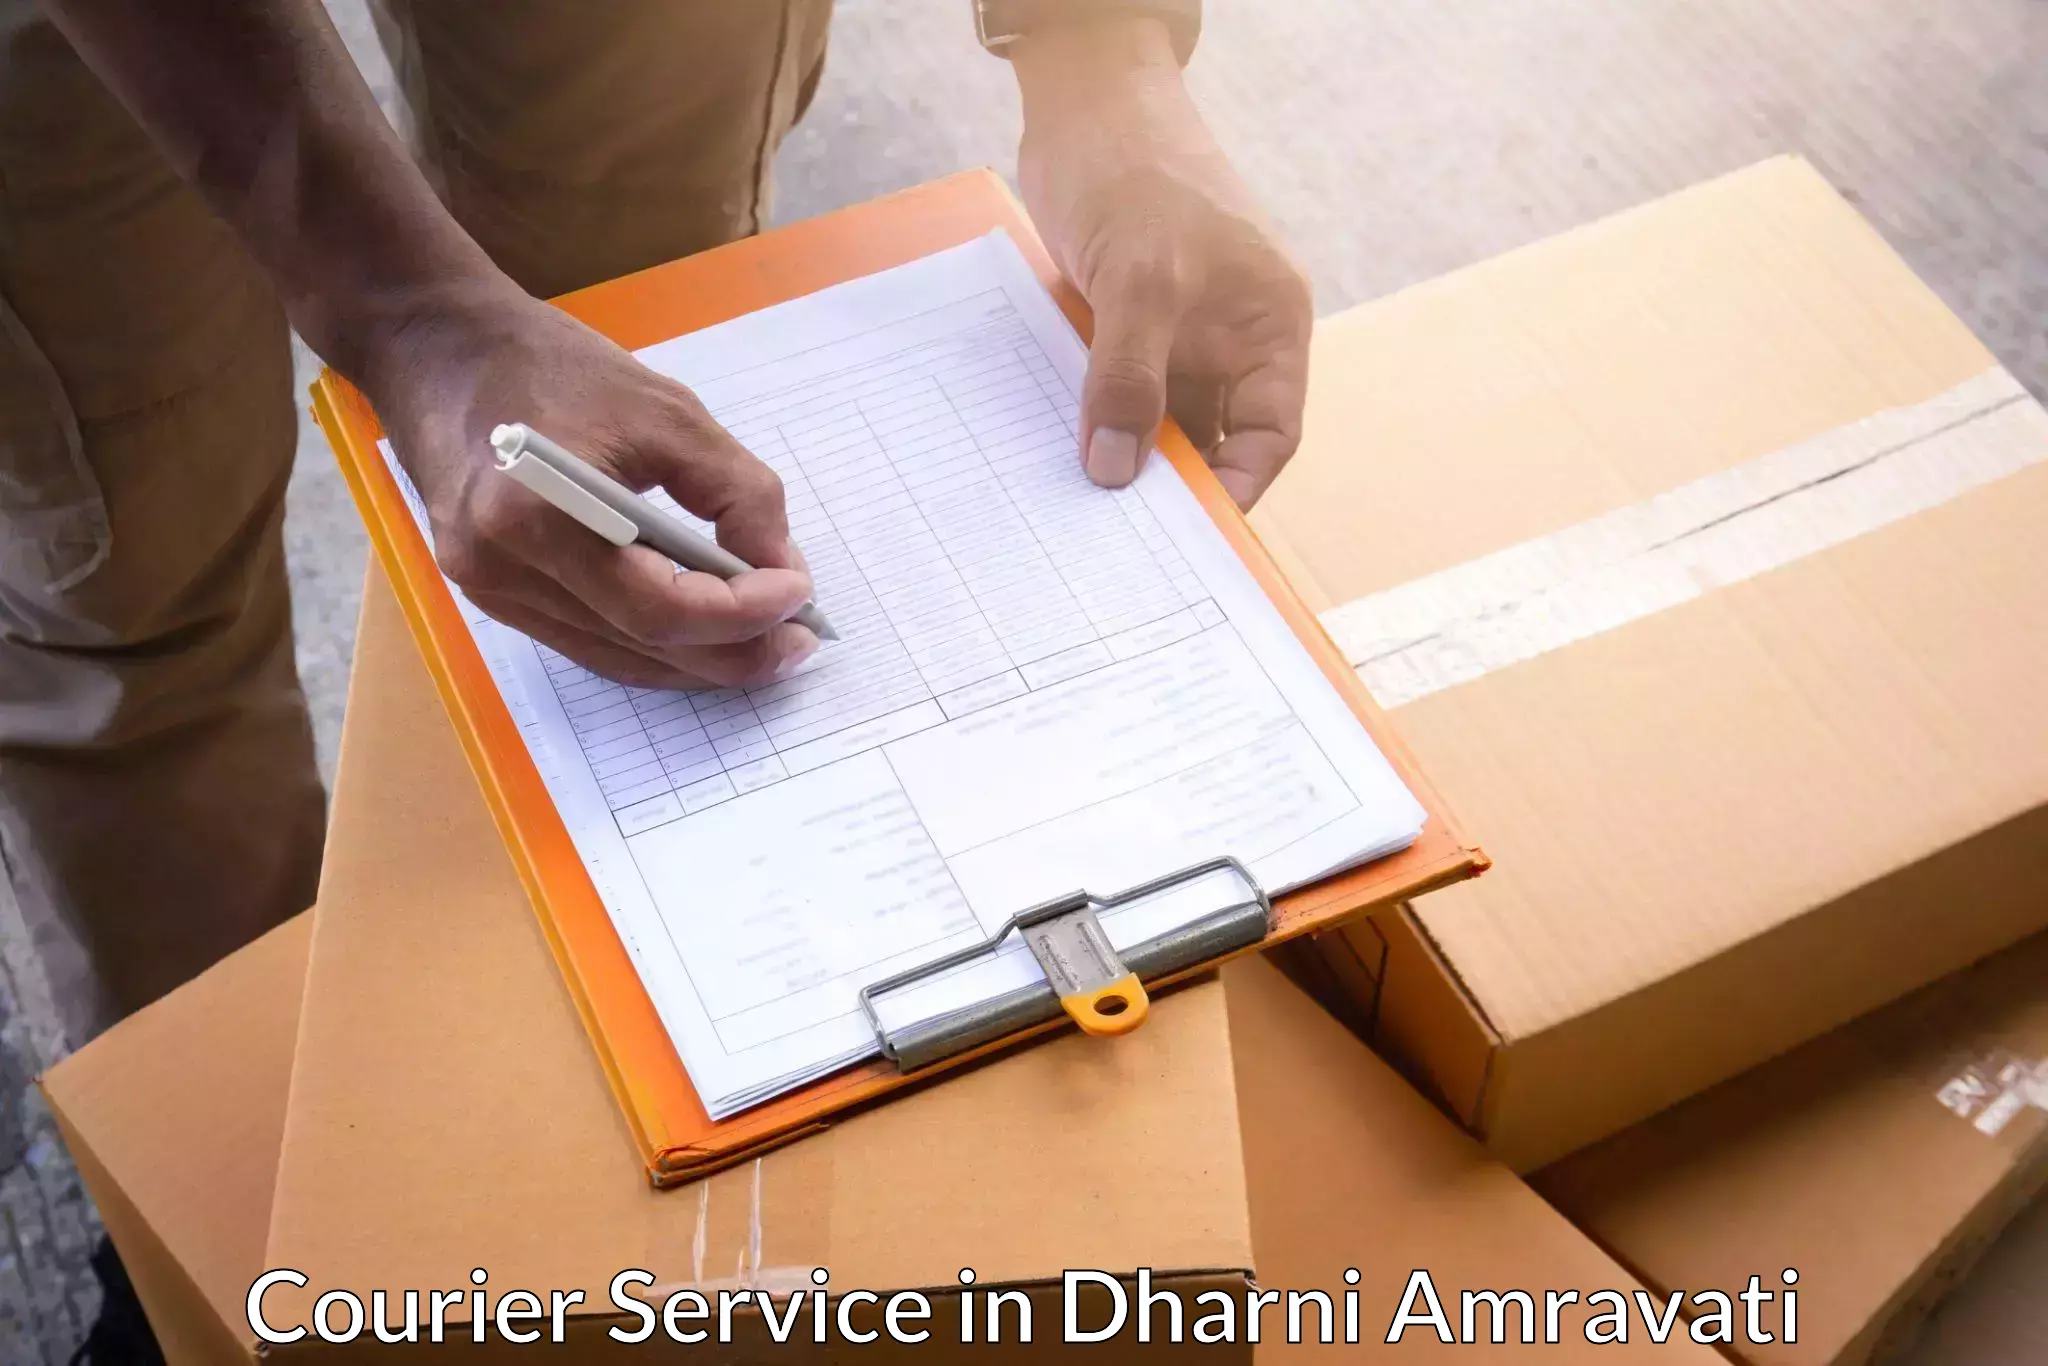 Medical delivery services in Dharni Amravati